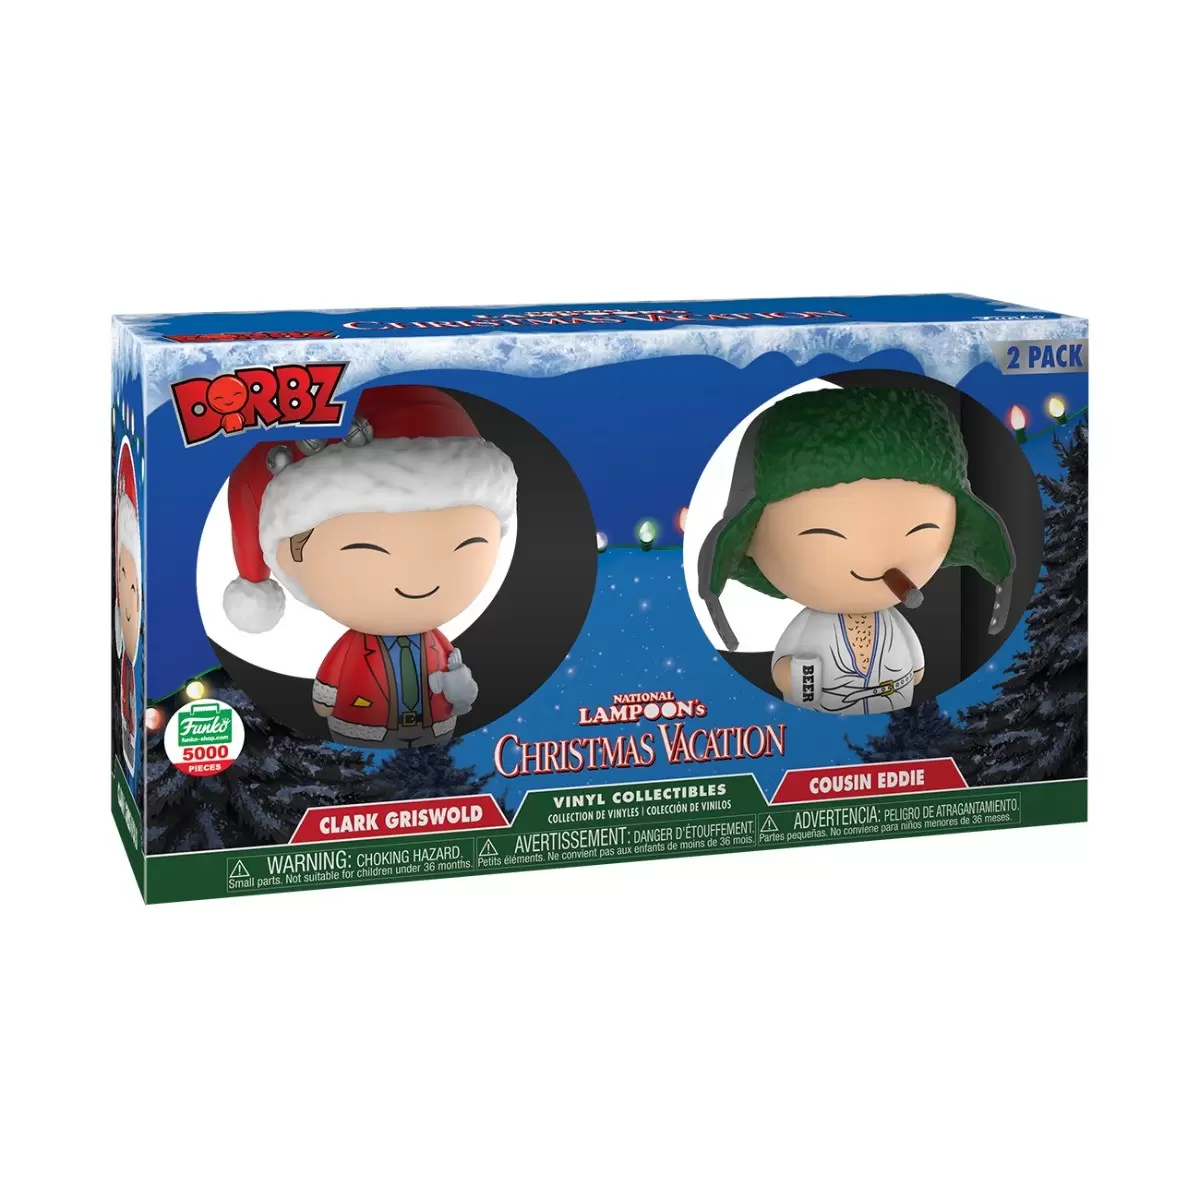 Dorbz - Christmas Vacation - Clark Griswold and Cousin Eddie 2 Pack